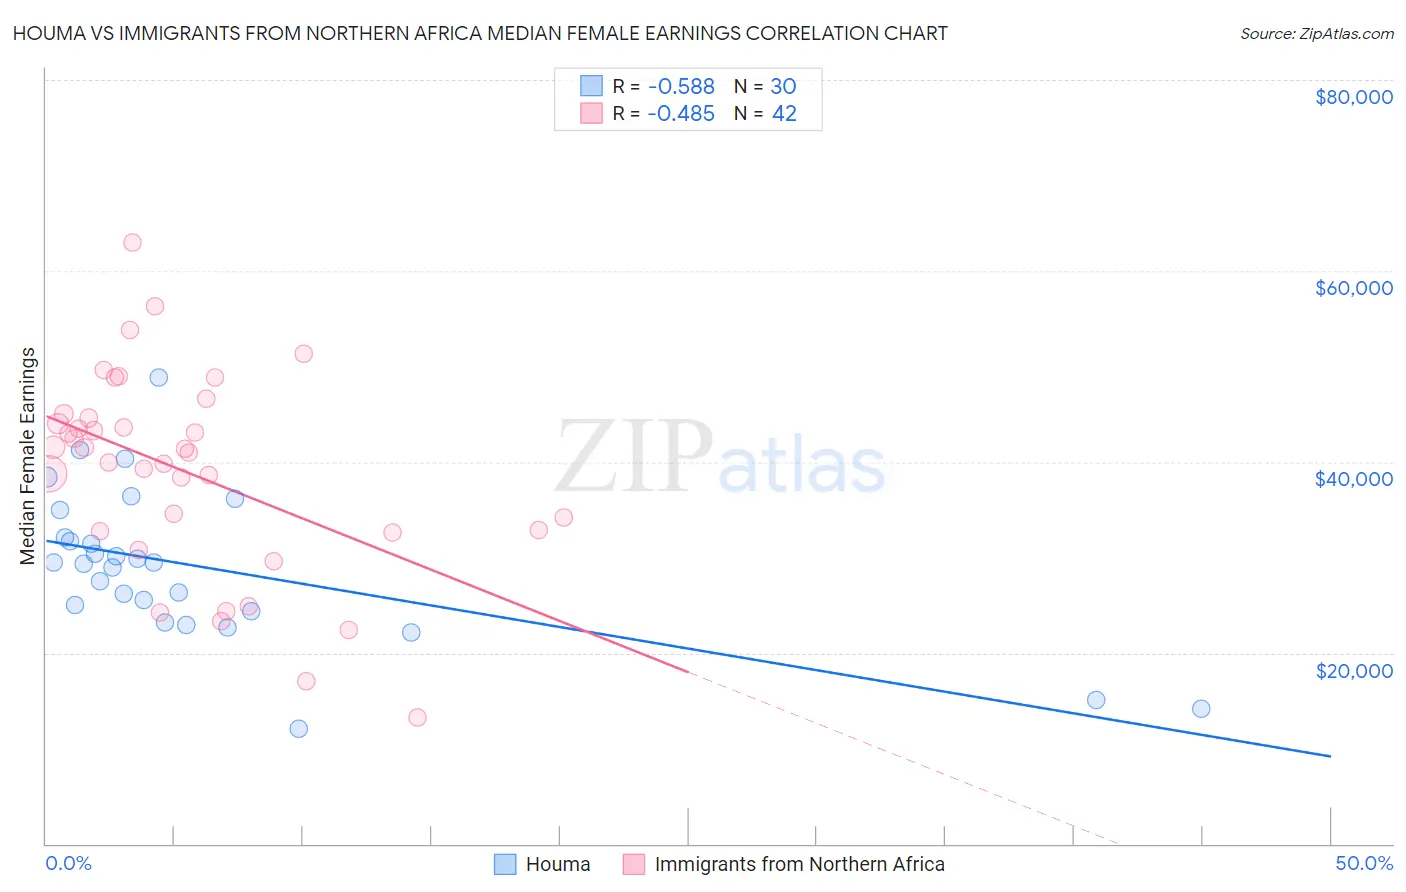 Houma vs Immigrants from Northern Africa Median Female Earnings